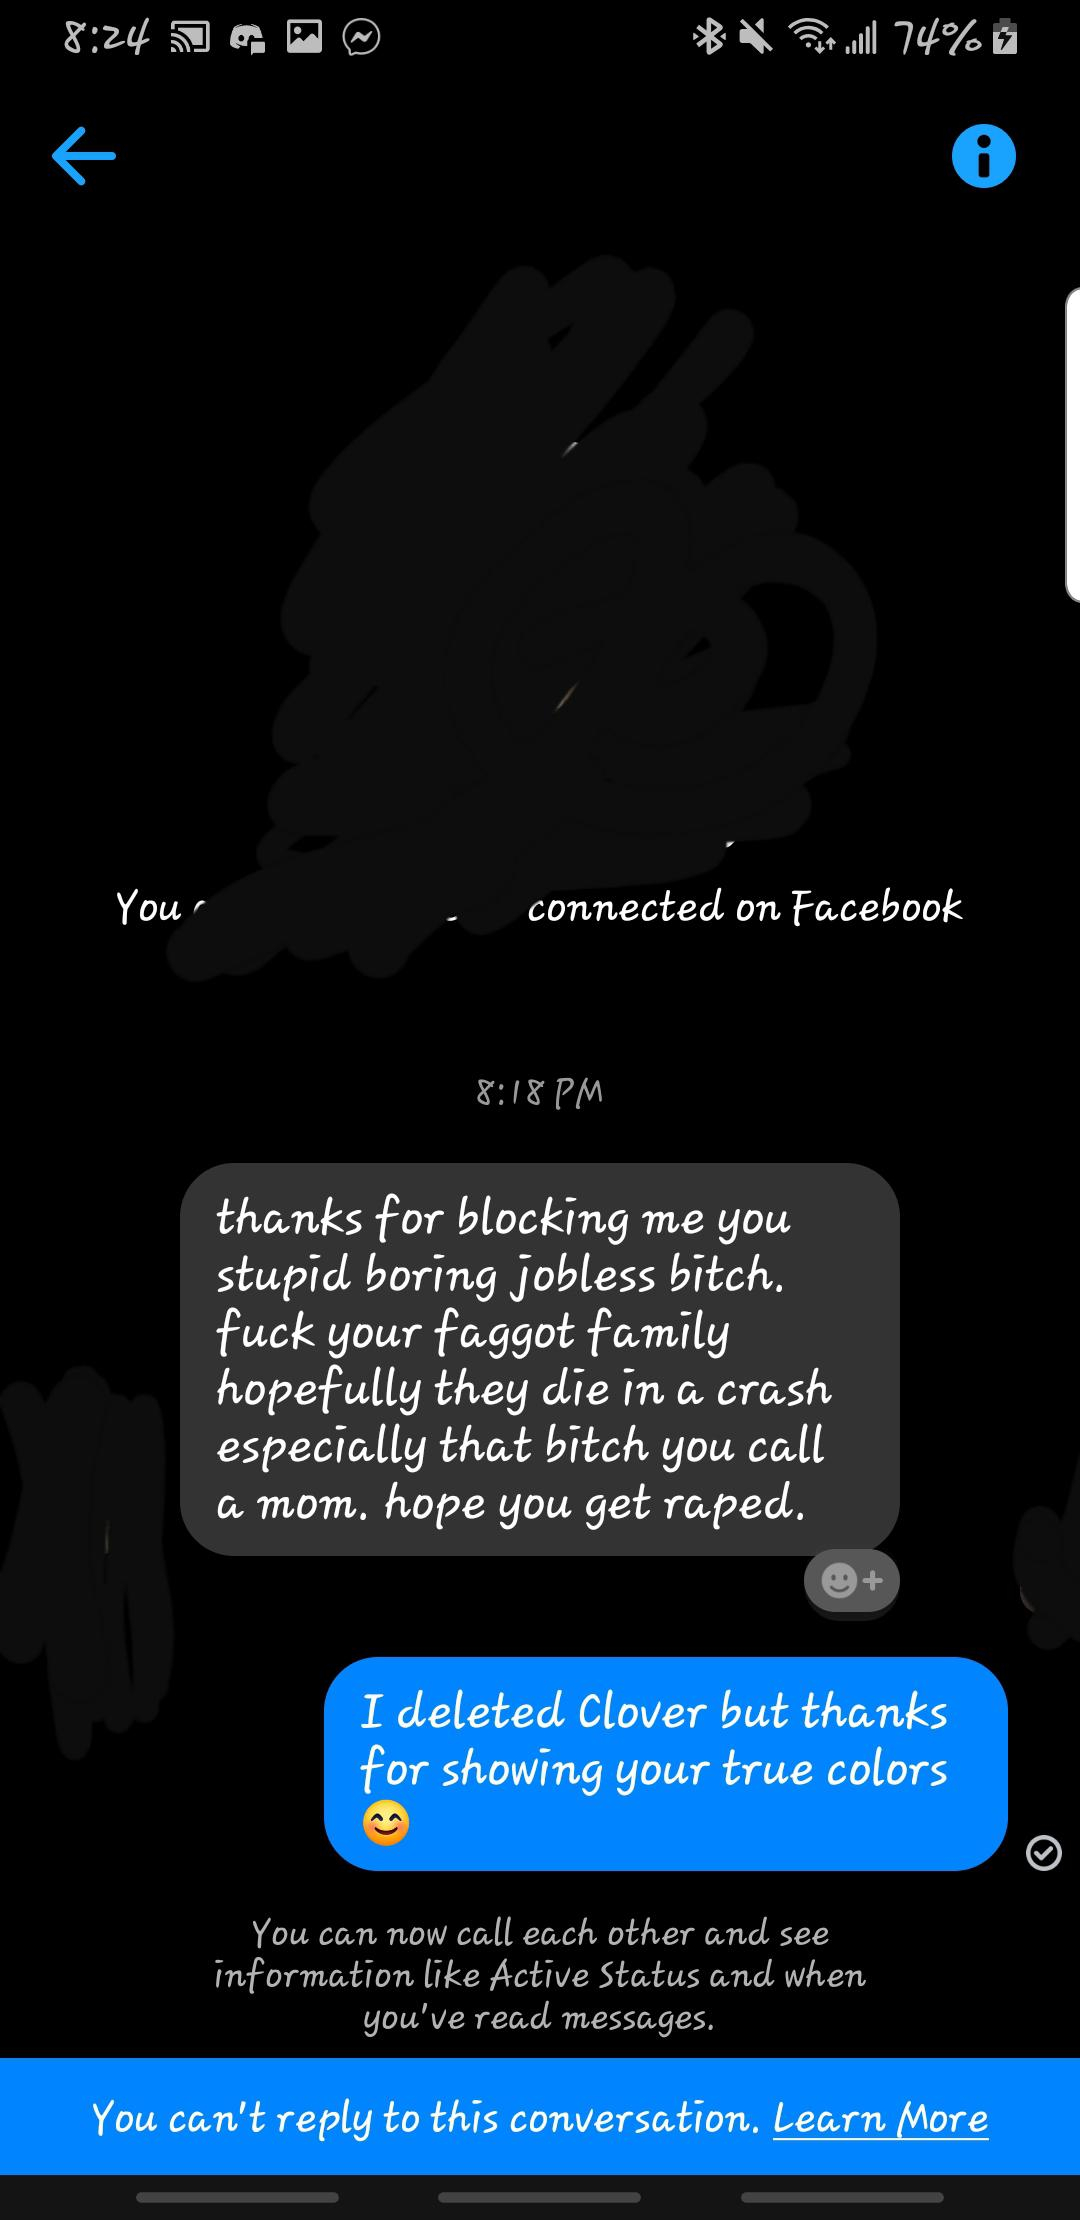 screenshot - K 74%8 You connected on Facebook thanks for blocking me you stupid boring jobless bitch. fuck your faggot family hopefully they die in a crash especially that bitch you call a mom, hope you get raped, I deleted Clover but thanks for showing y